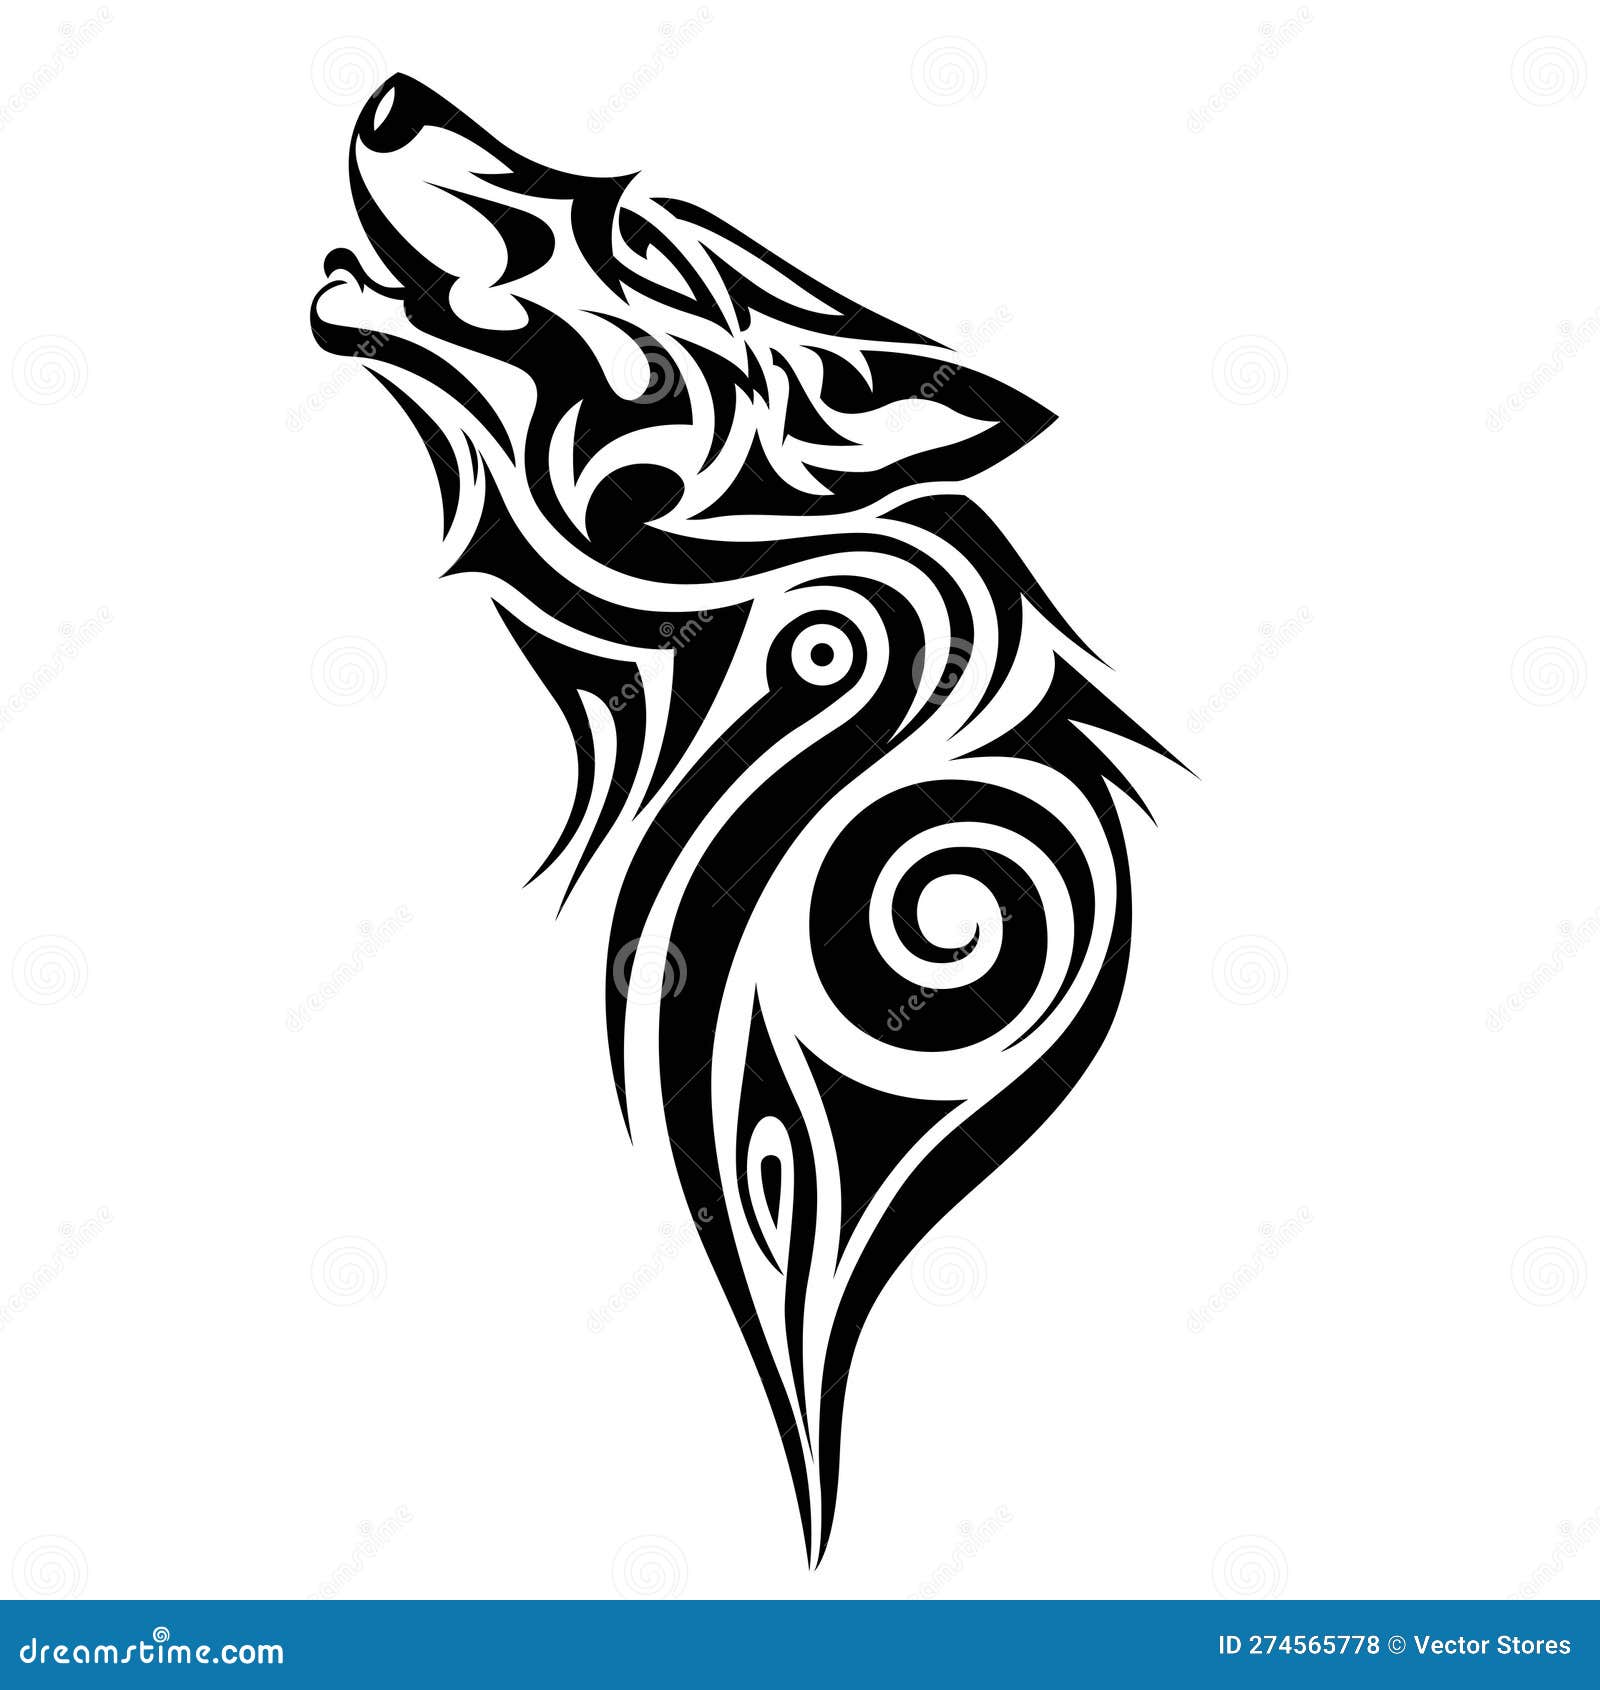 11 Simple Tribal Wolf Tattoo Ideas That Will Blow Your Mind  alexie